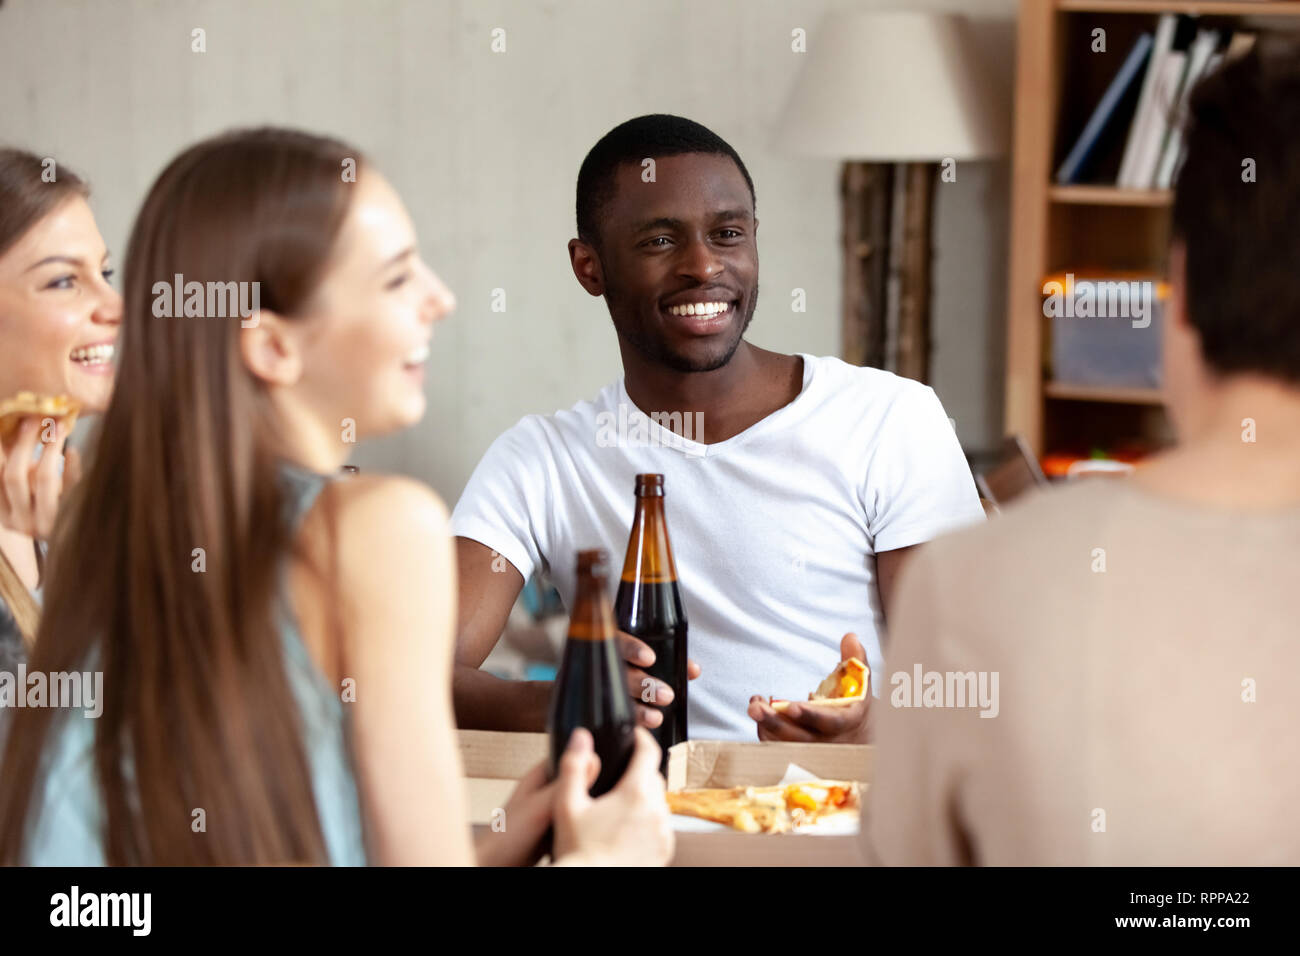 Smiling African American man drinking beer with friends in pizzeria Stock Photo